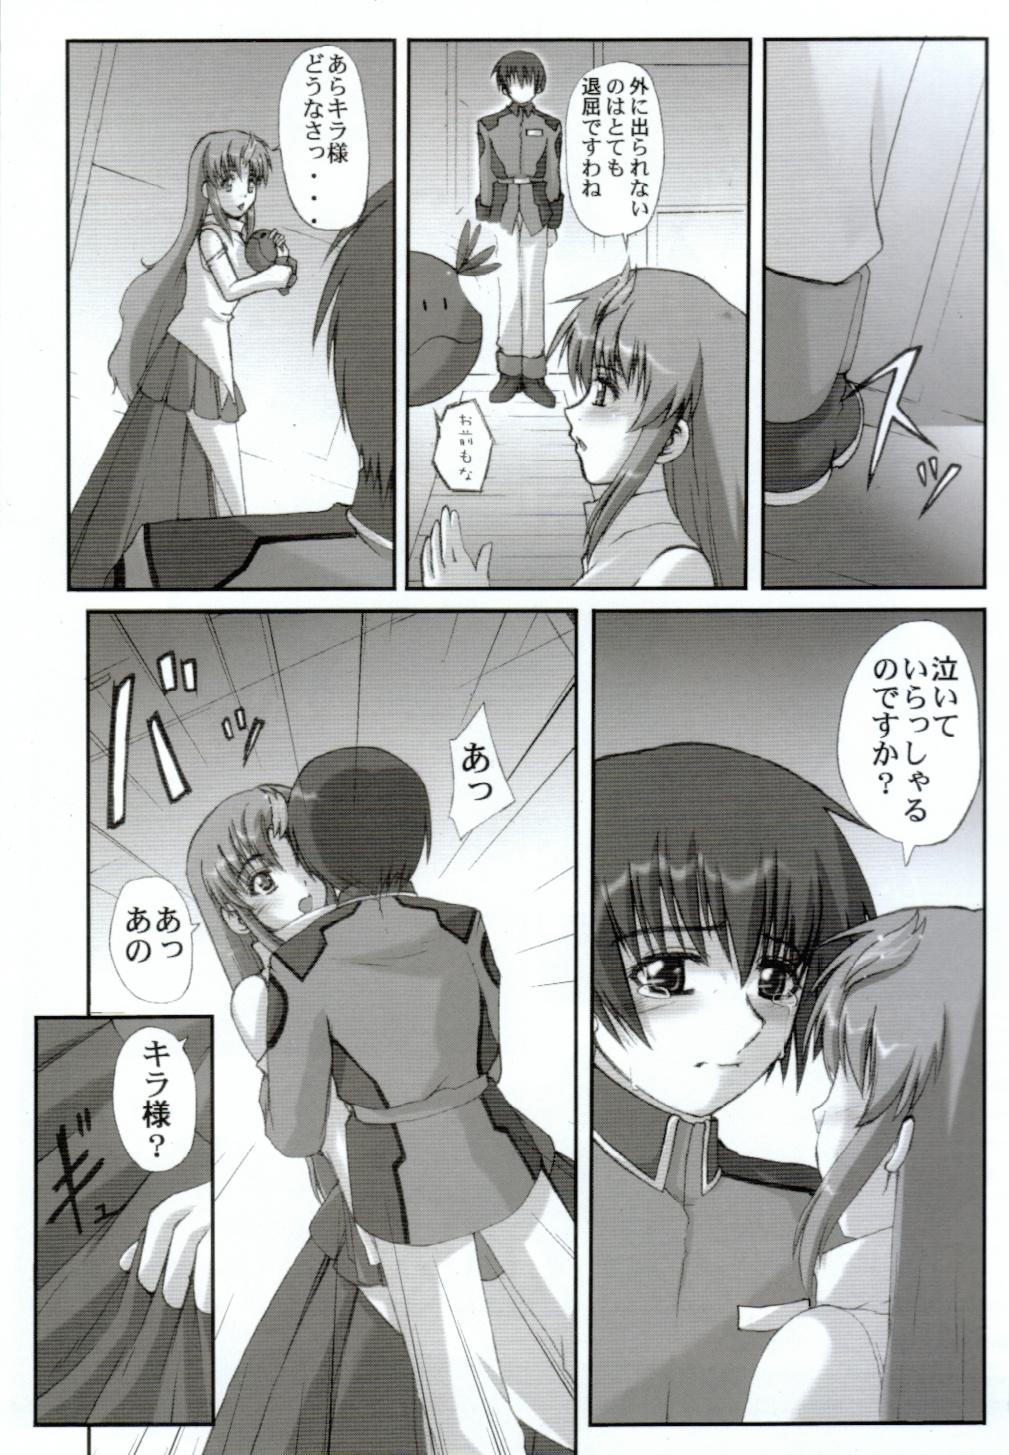 Chick My Milky Way - Gundam seed Ginger - Page 8